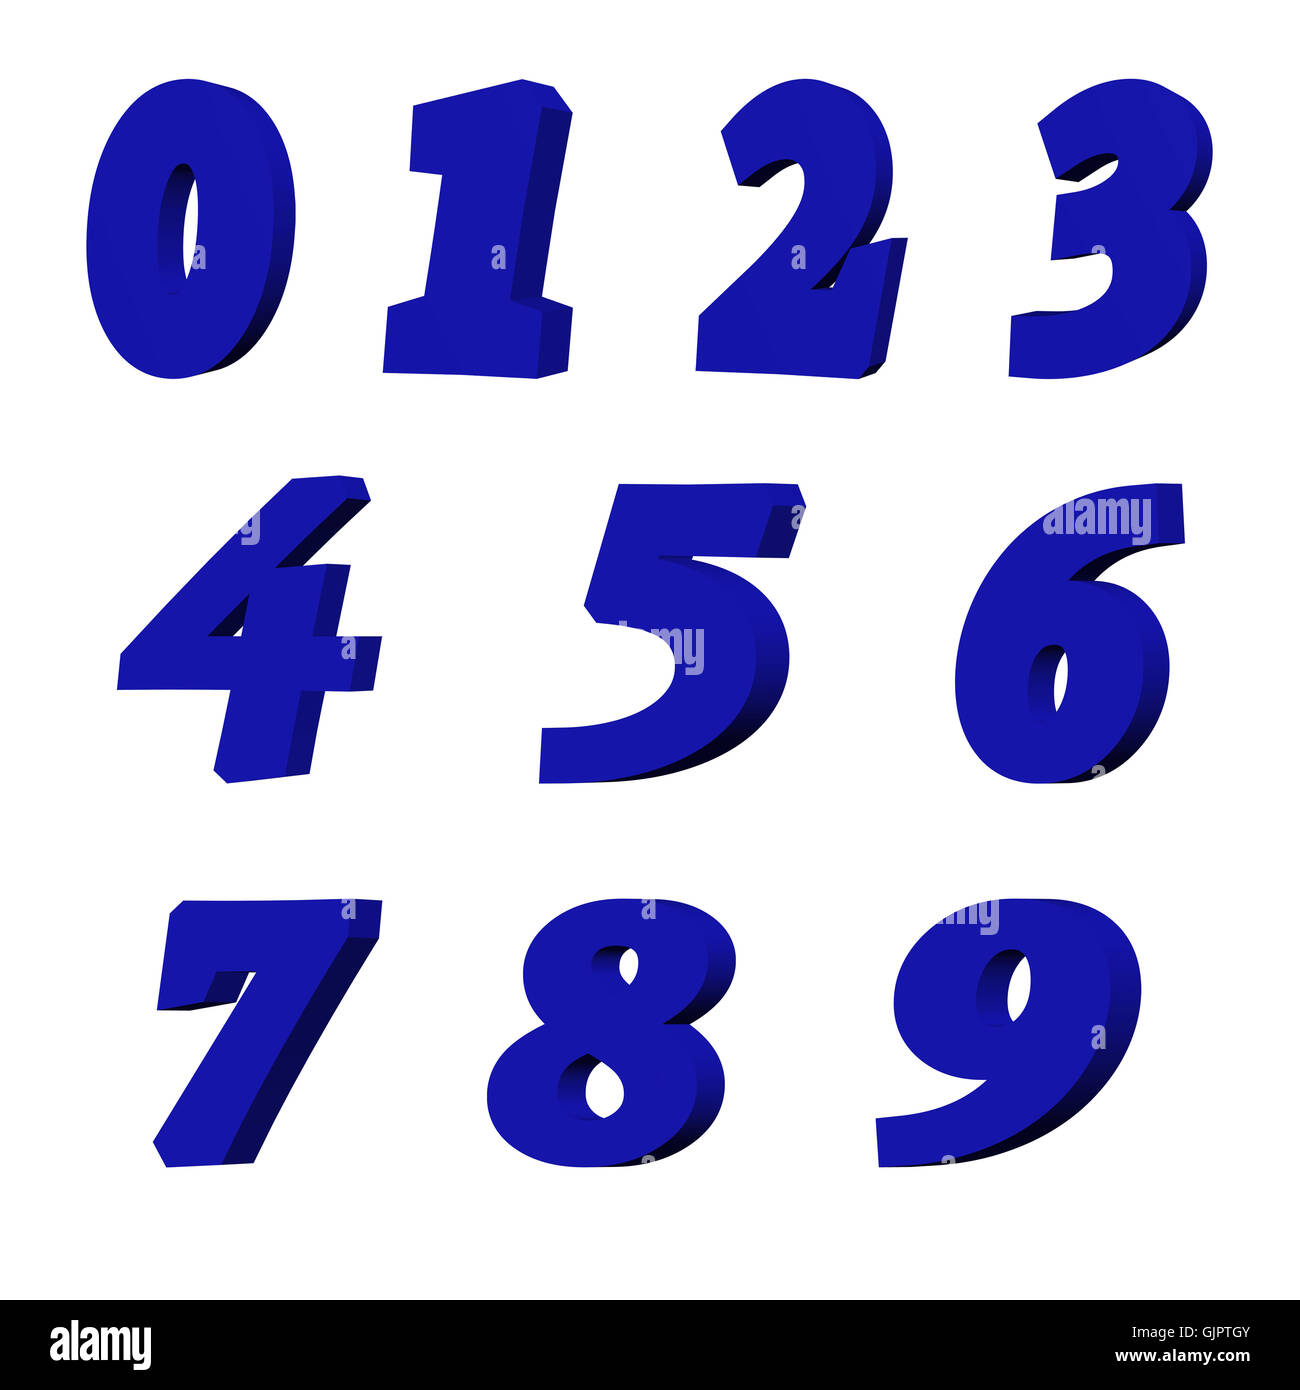 blue numbers 3D illustration on white background Stock Photo